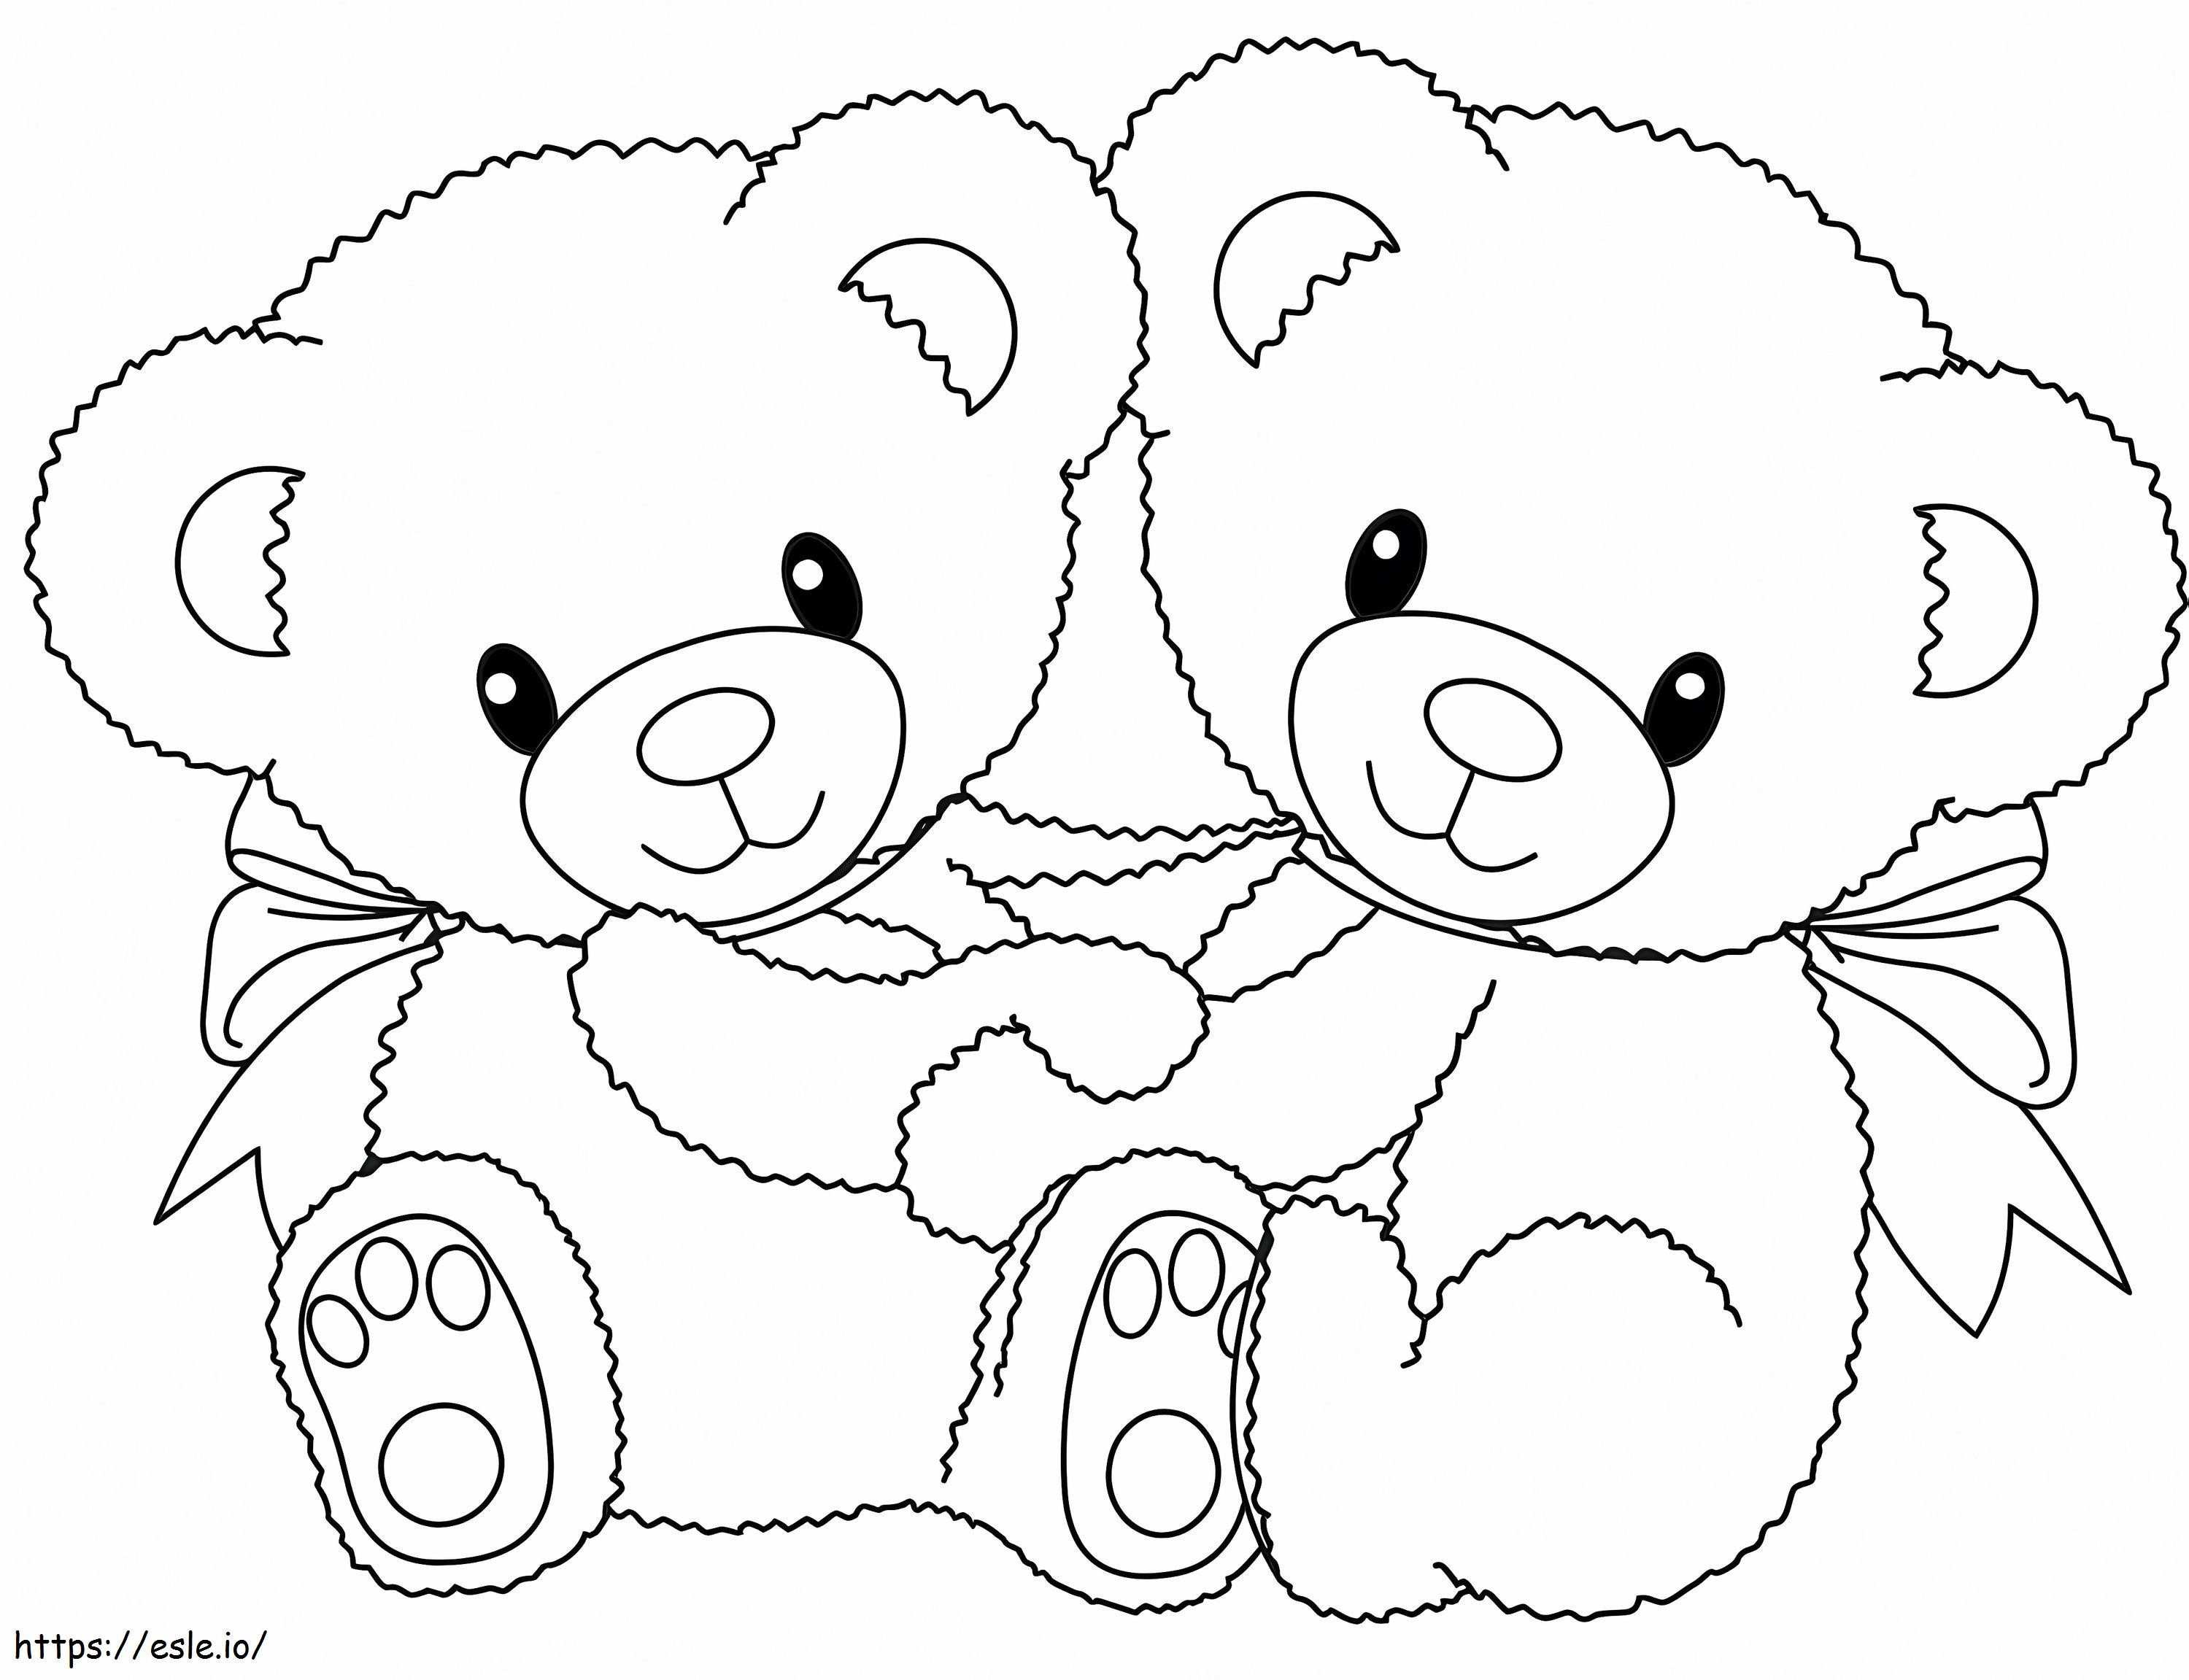 Cute Teddy Bears coloring page